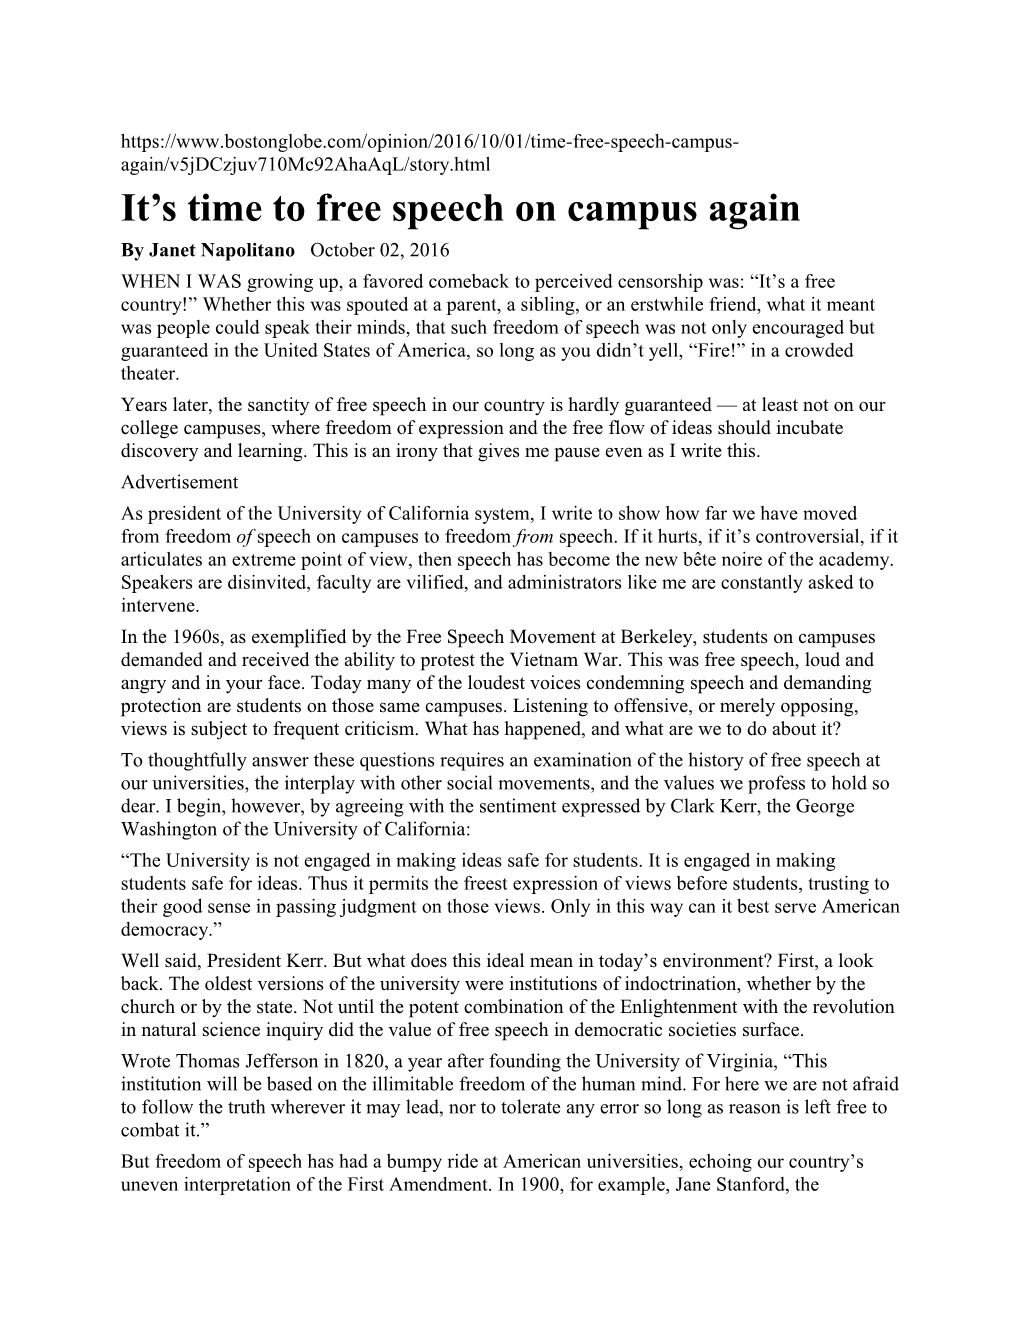 It S Time to Free Speech on Campus Again